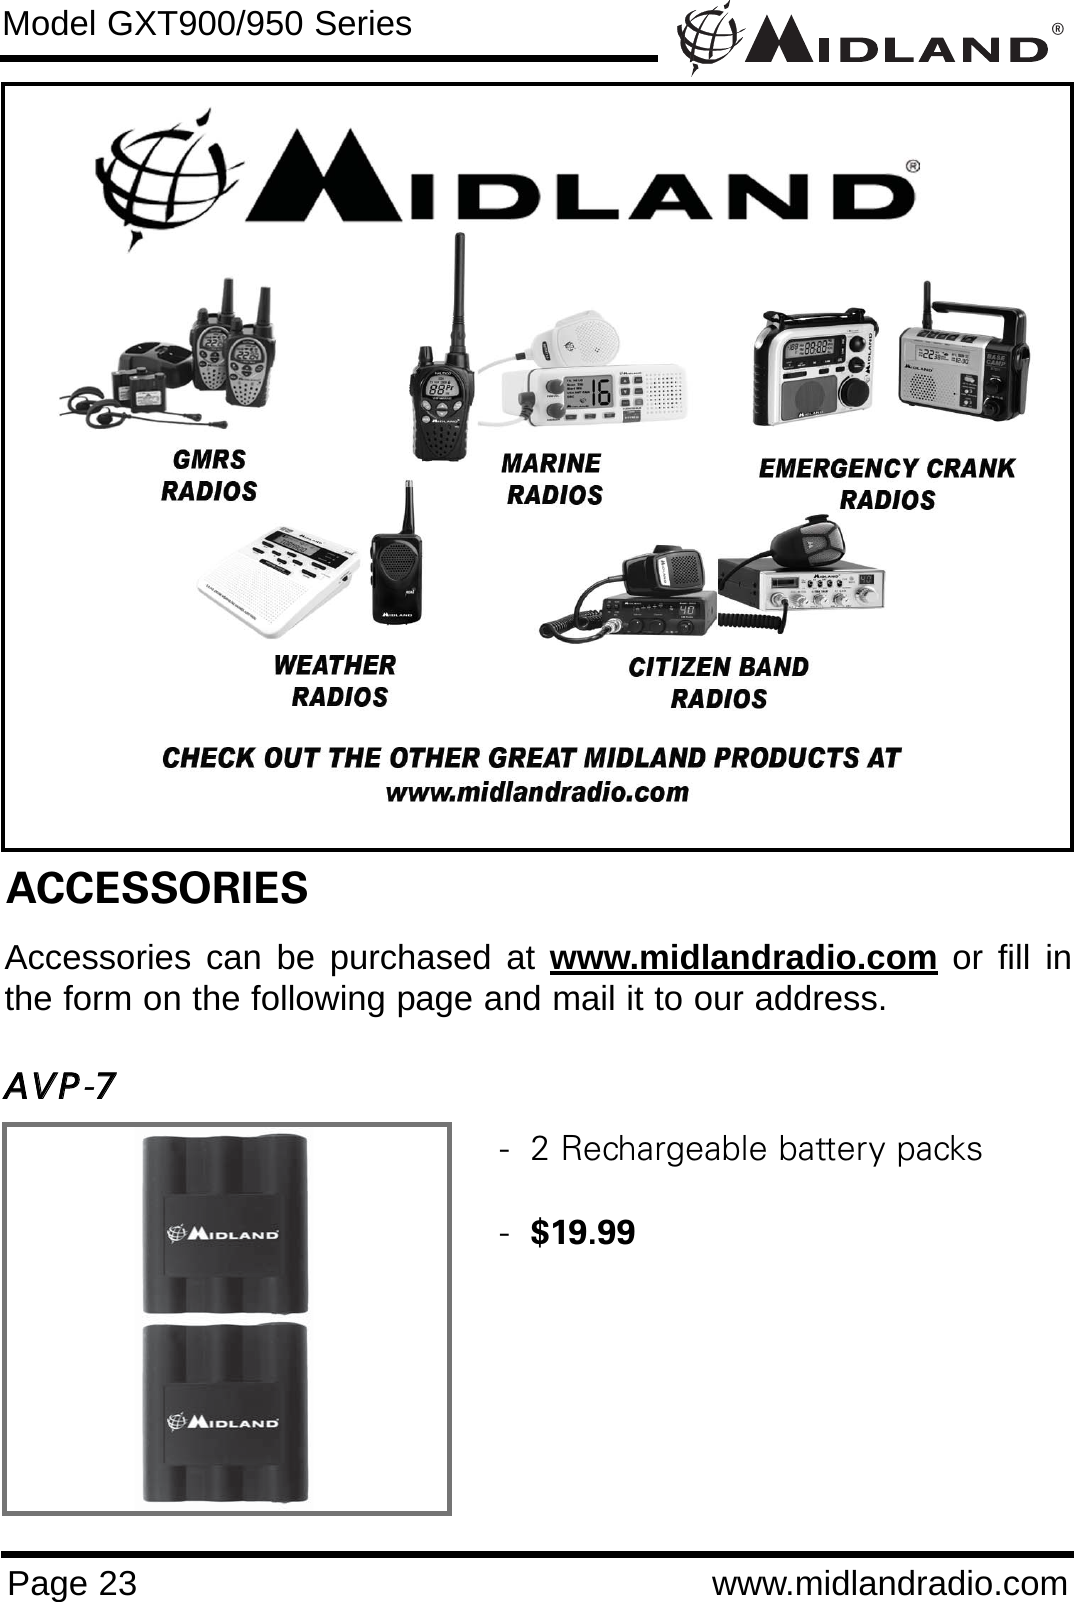 ®Page 23 www.midlandradio.comModel GXT900/950 SeriesACCESSORIESAccessories can be purchased at www.midlandradio.com or fill inthe form on the following page and mail it to our address.AAVVPP-77-  2 Rechargeable battery packs-  $19.99